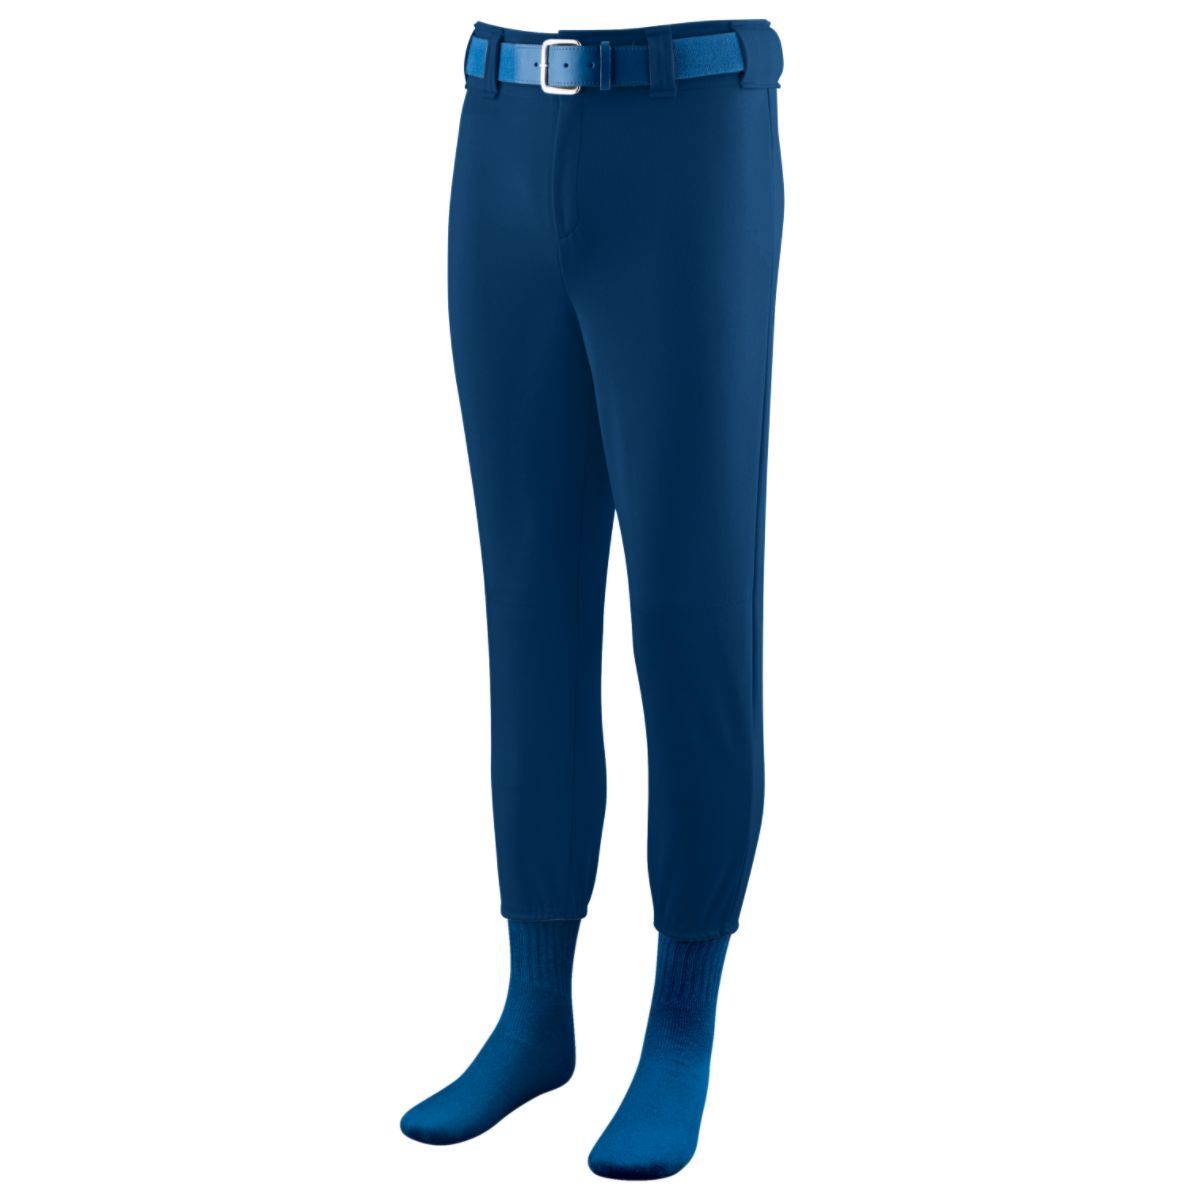 Augusta Sportswear Softball/Baseball Pant in Navy  -Part of the Adult, Adult-Pants, Pants, Augusta-Products, Softball product lines at KanaleyCreations.com